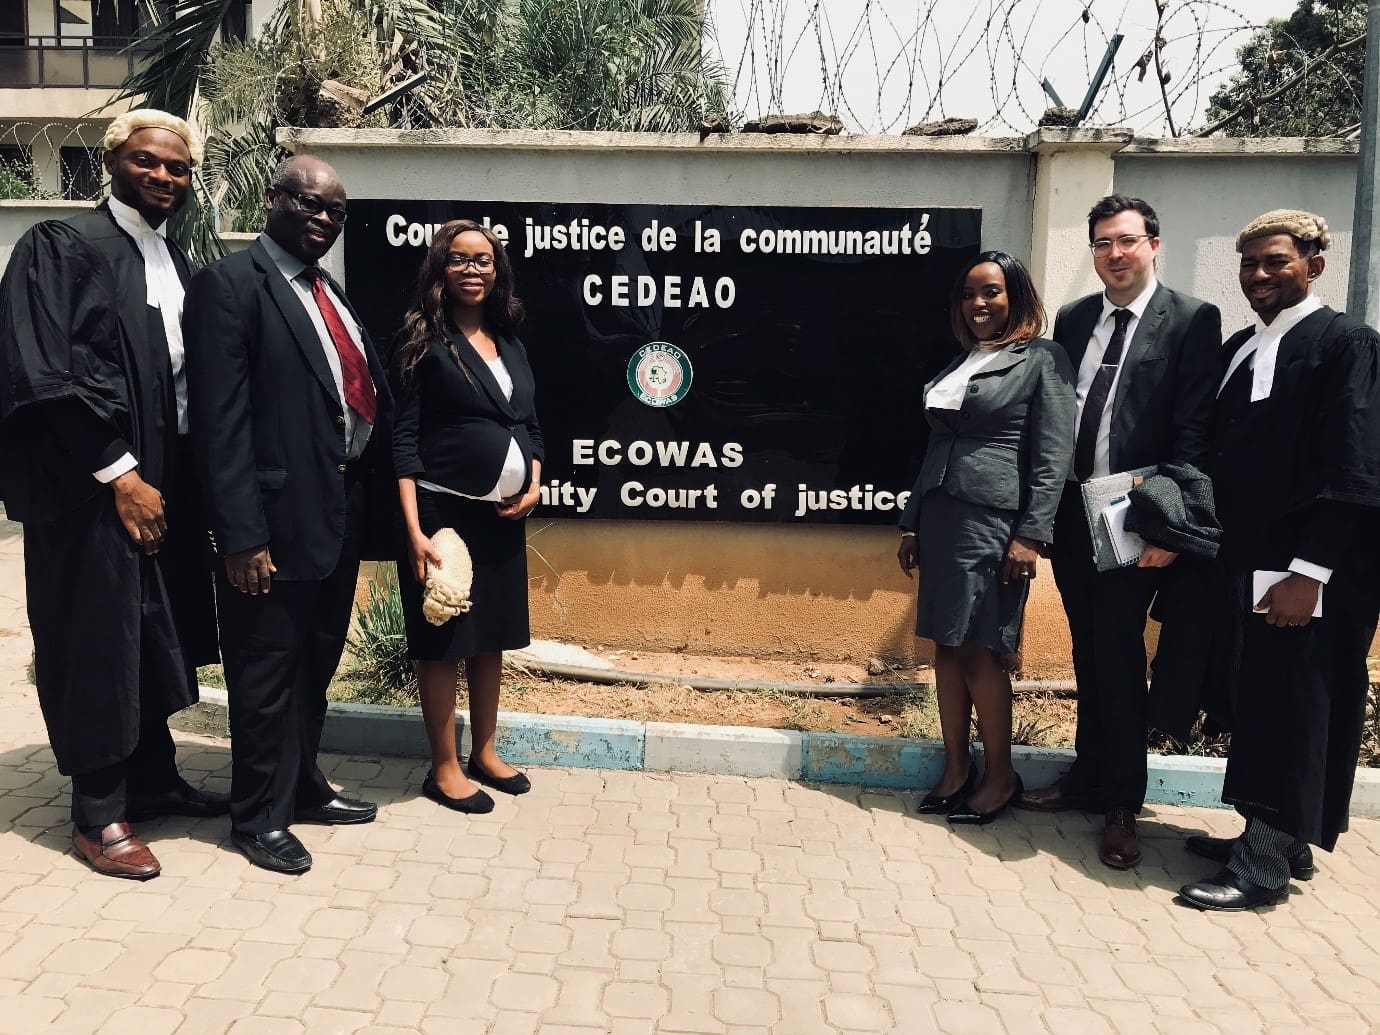 UPDATE: ECOWAS Court delivers landmark decision in one of our strategic cases challenging the laws used to silence and intimidate journalists in the Gambia